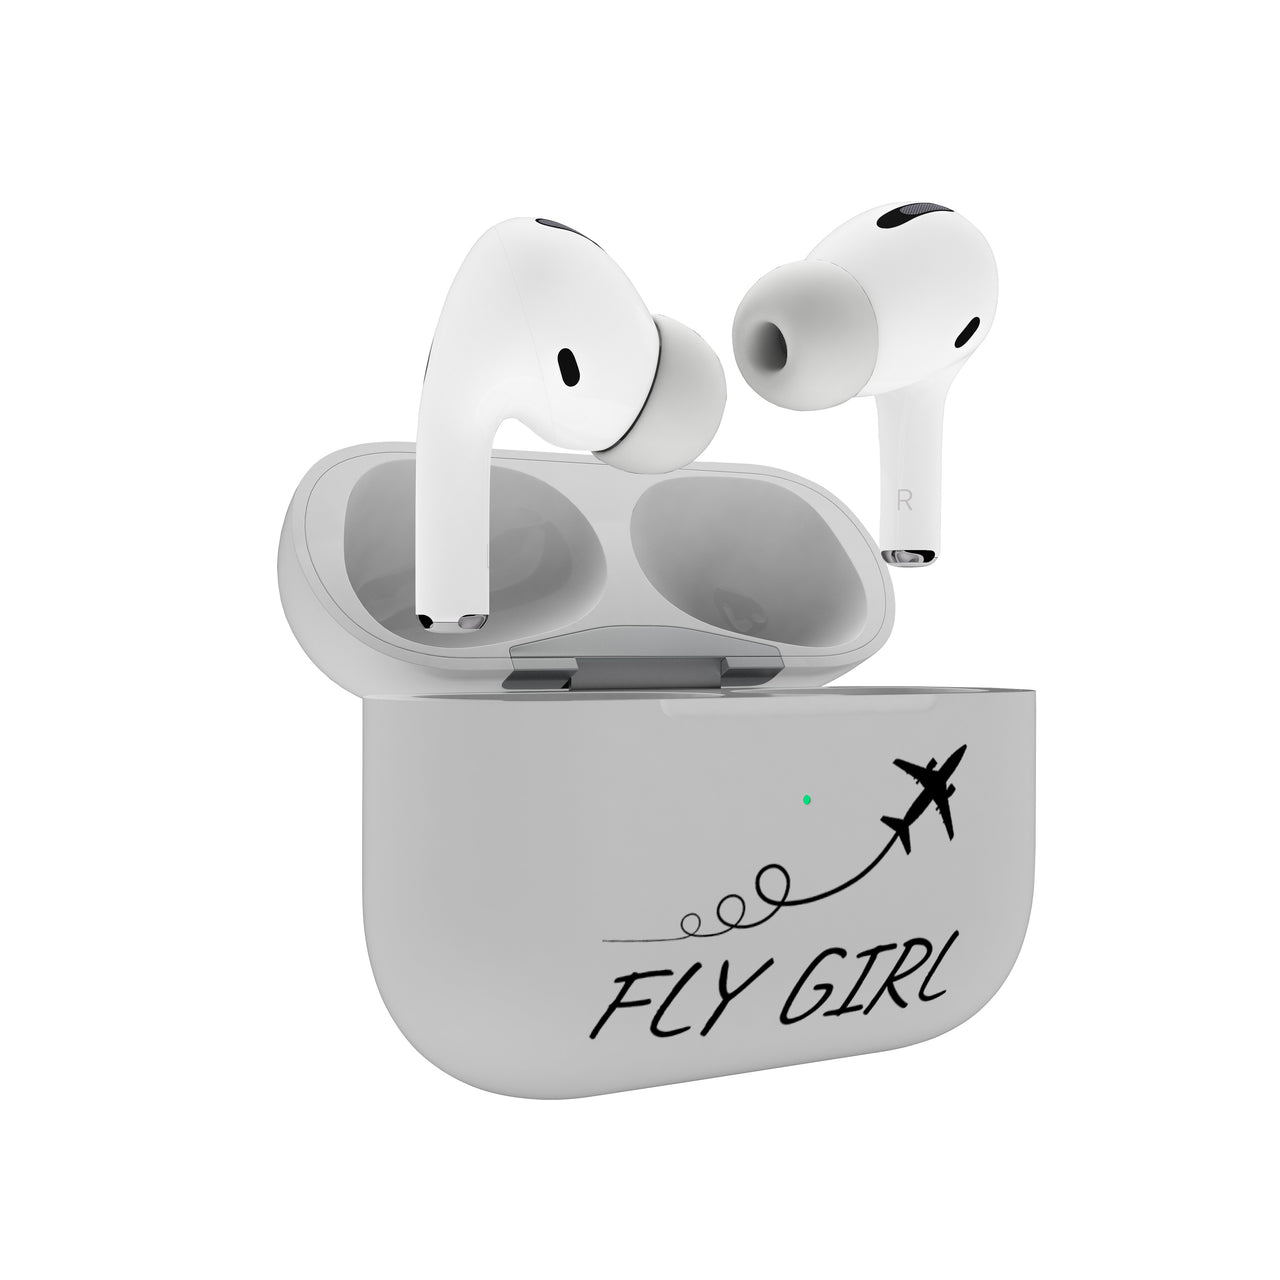 Just Fly It & Fly Girl Designed AirPods  Cases